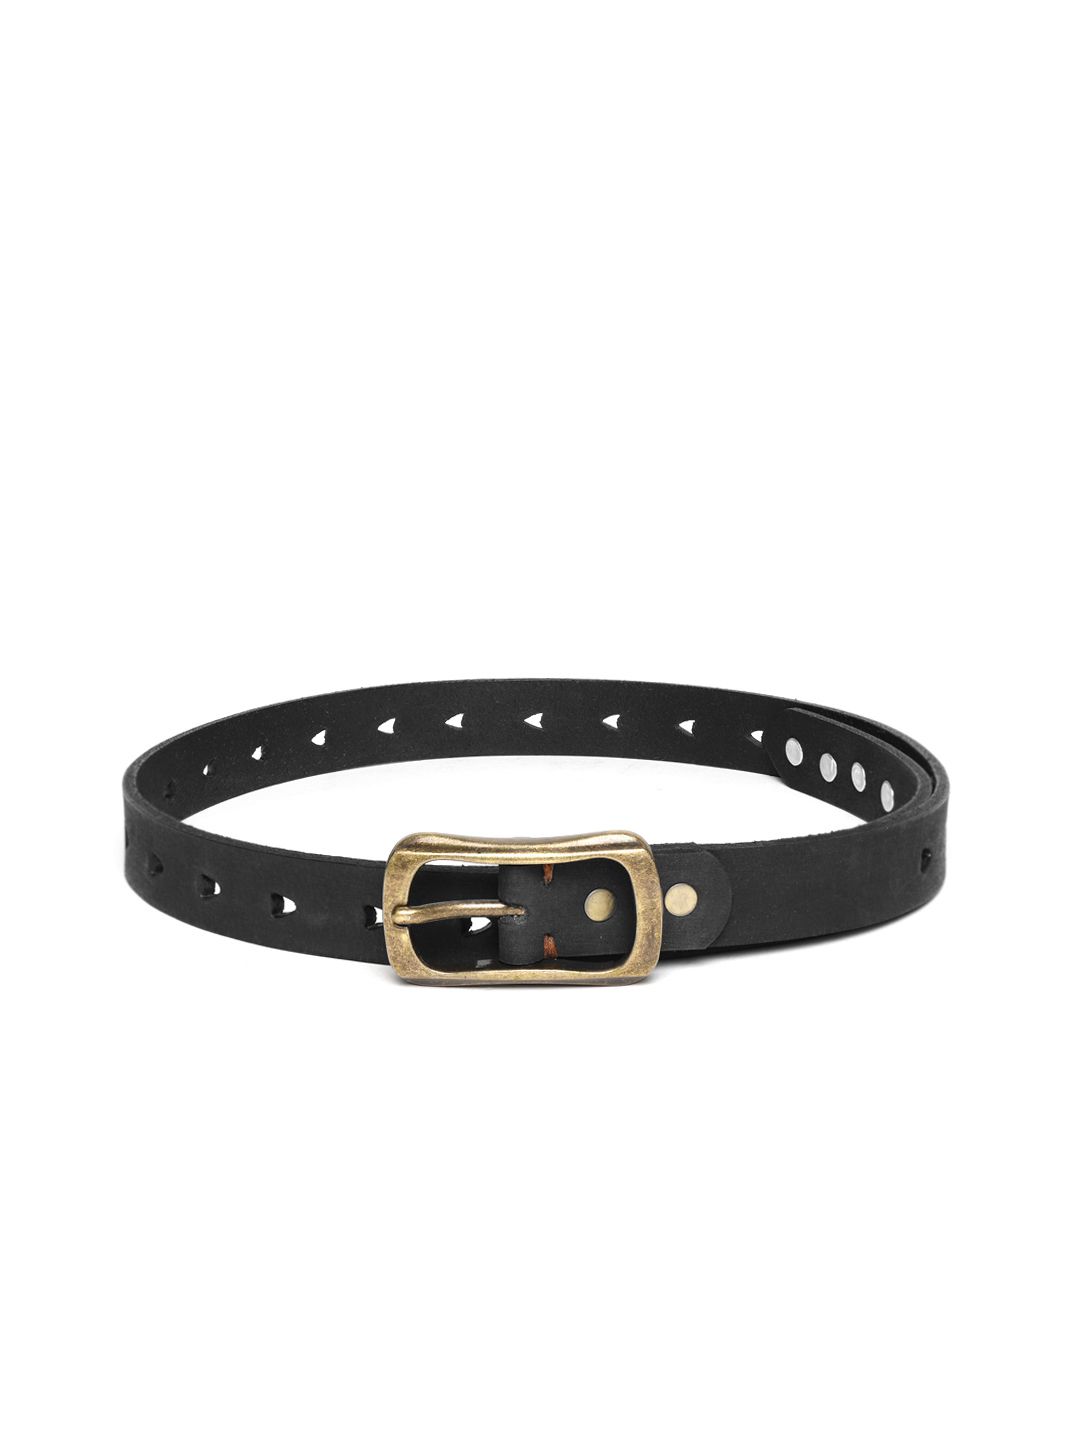 SASSAFRAS Women Black Cut Work Leather Belt with Studded Detail Price in India